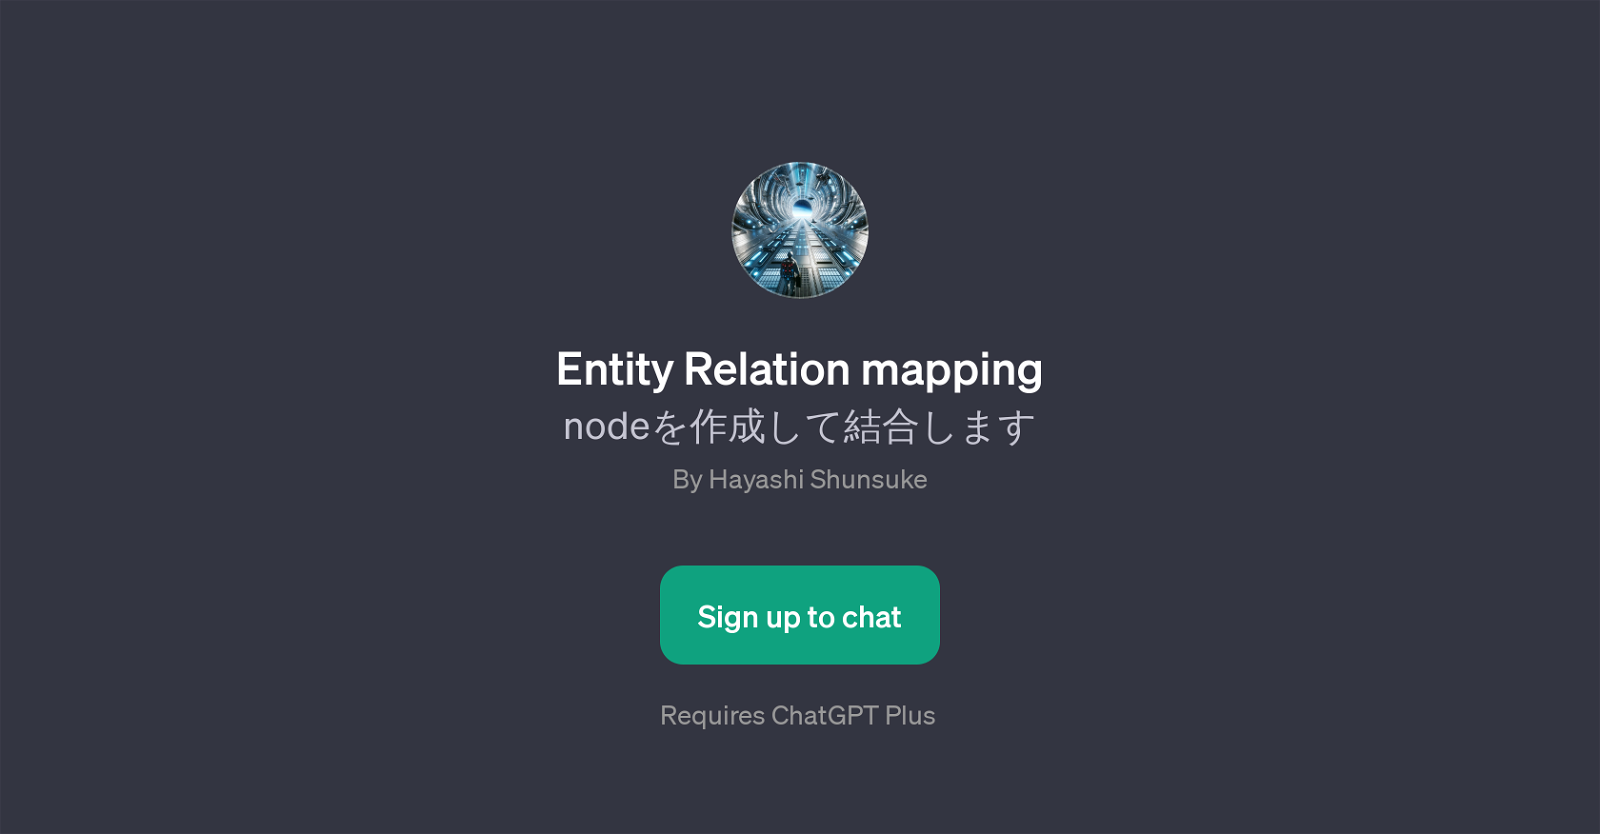 Entity Relation Mapping GPT website